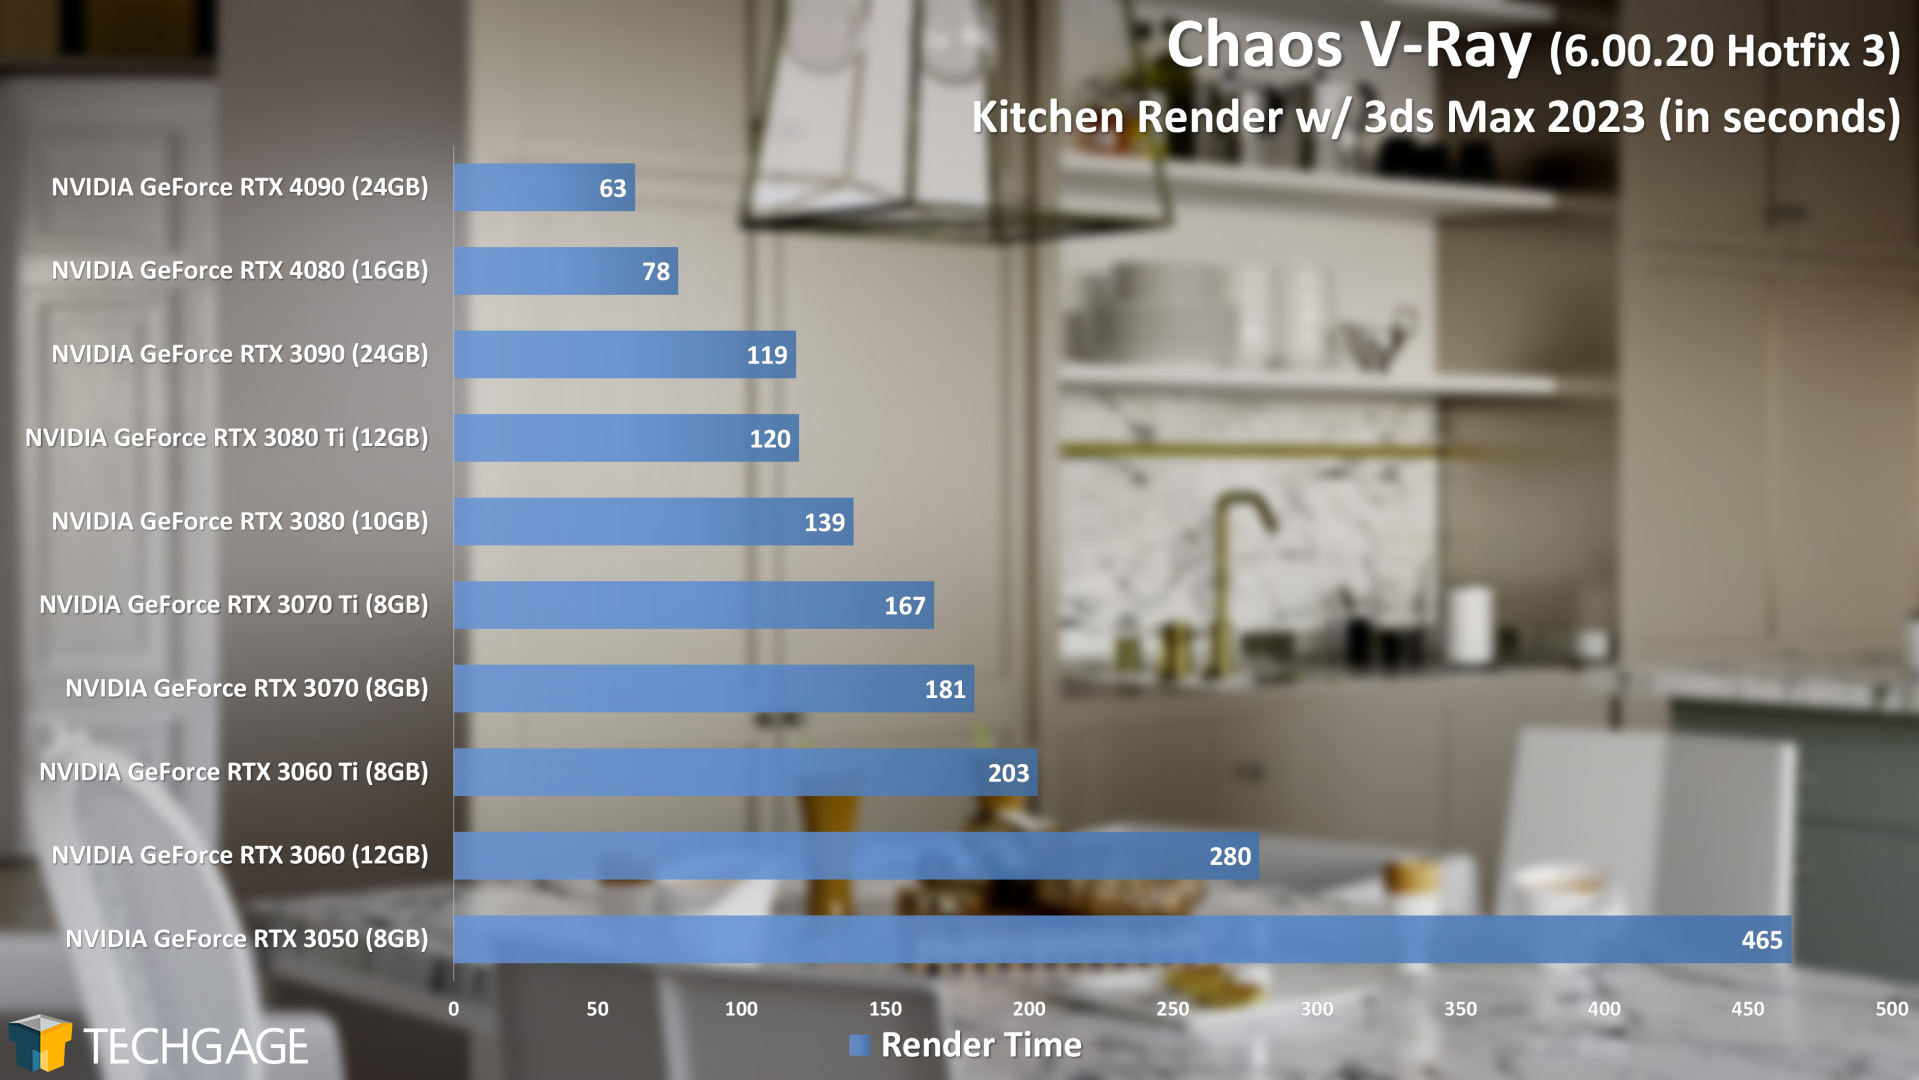 Chaos V-Ray GPU Rendering - Kitchen Project (NVIDIA GeForce RTX 4080)